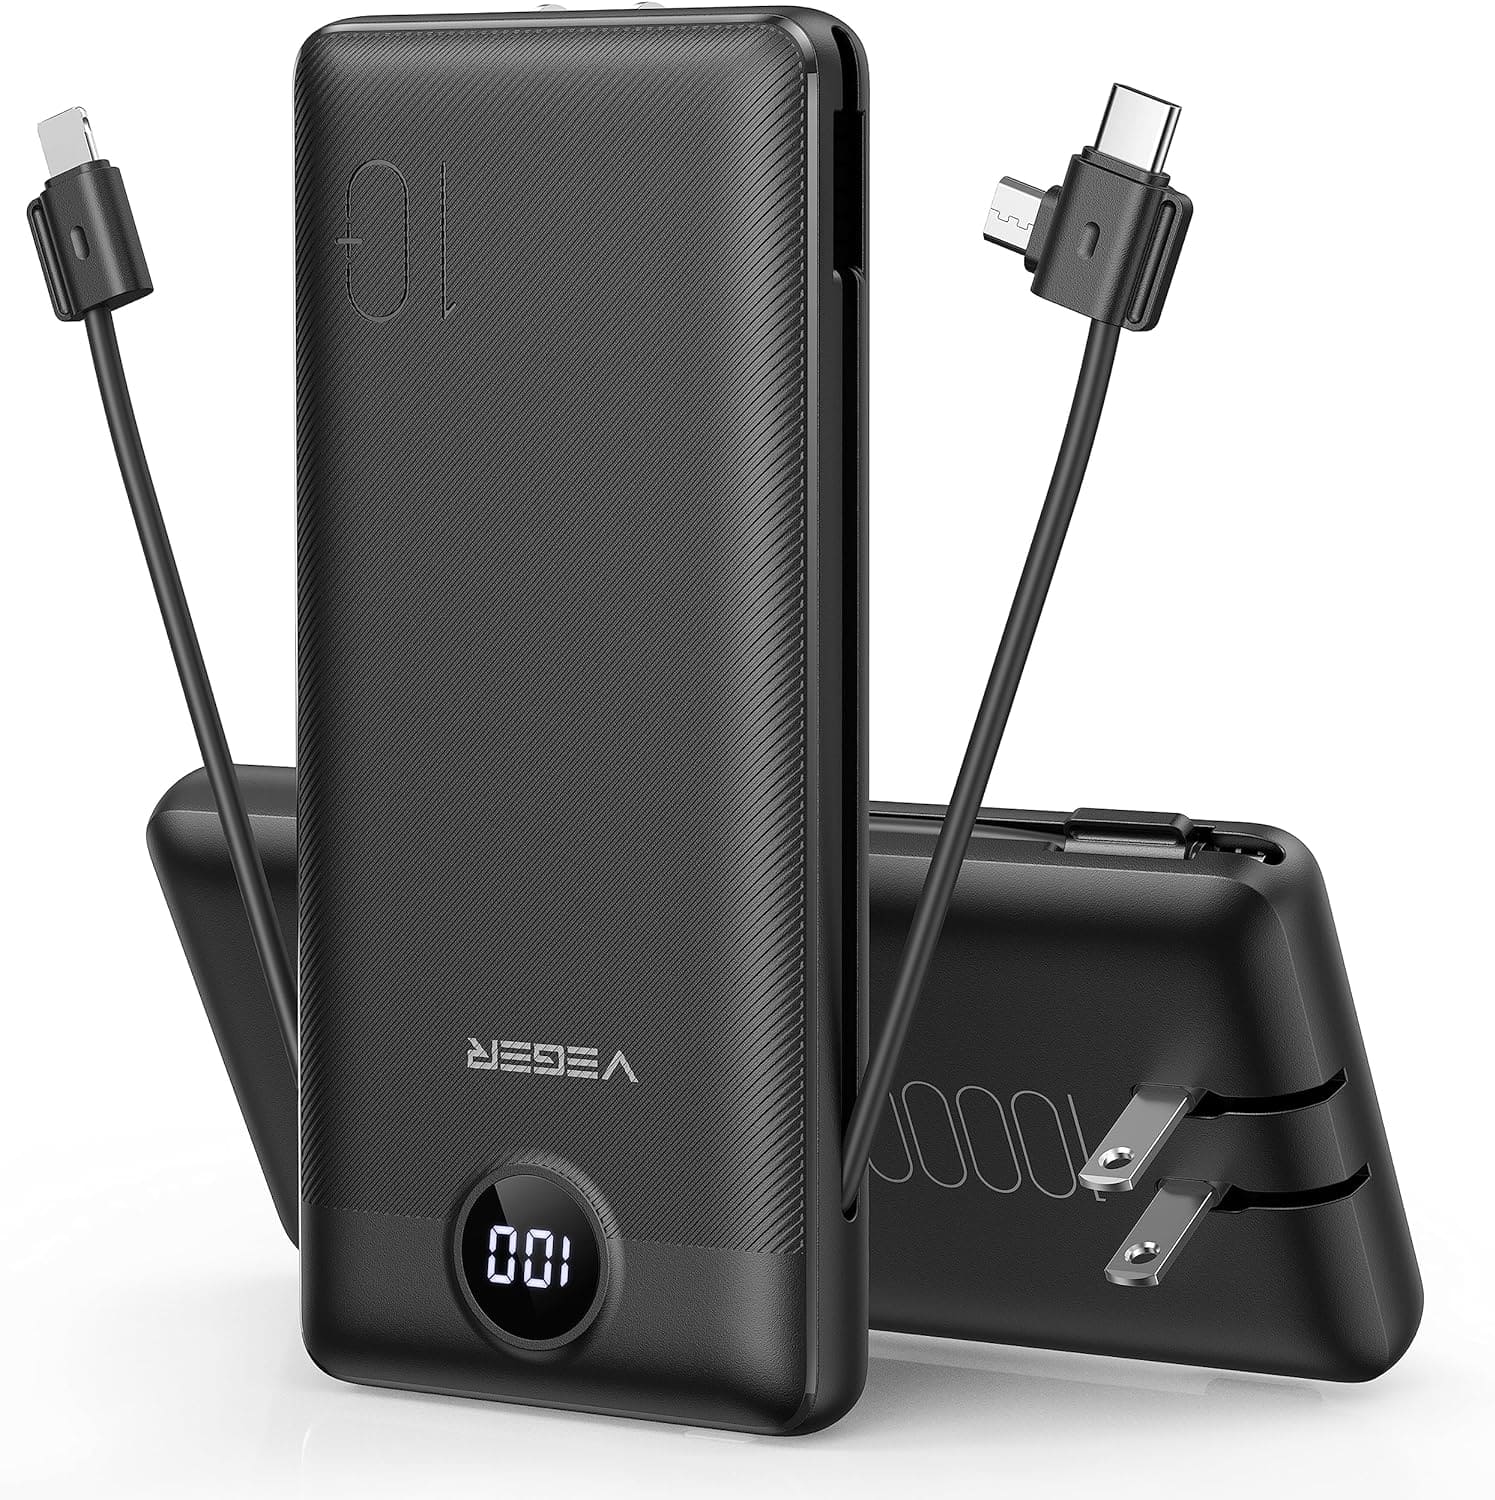 Portable Charger for iPhone with Built in Cables